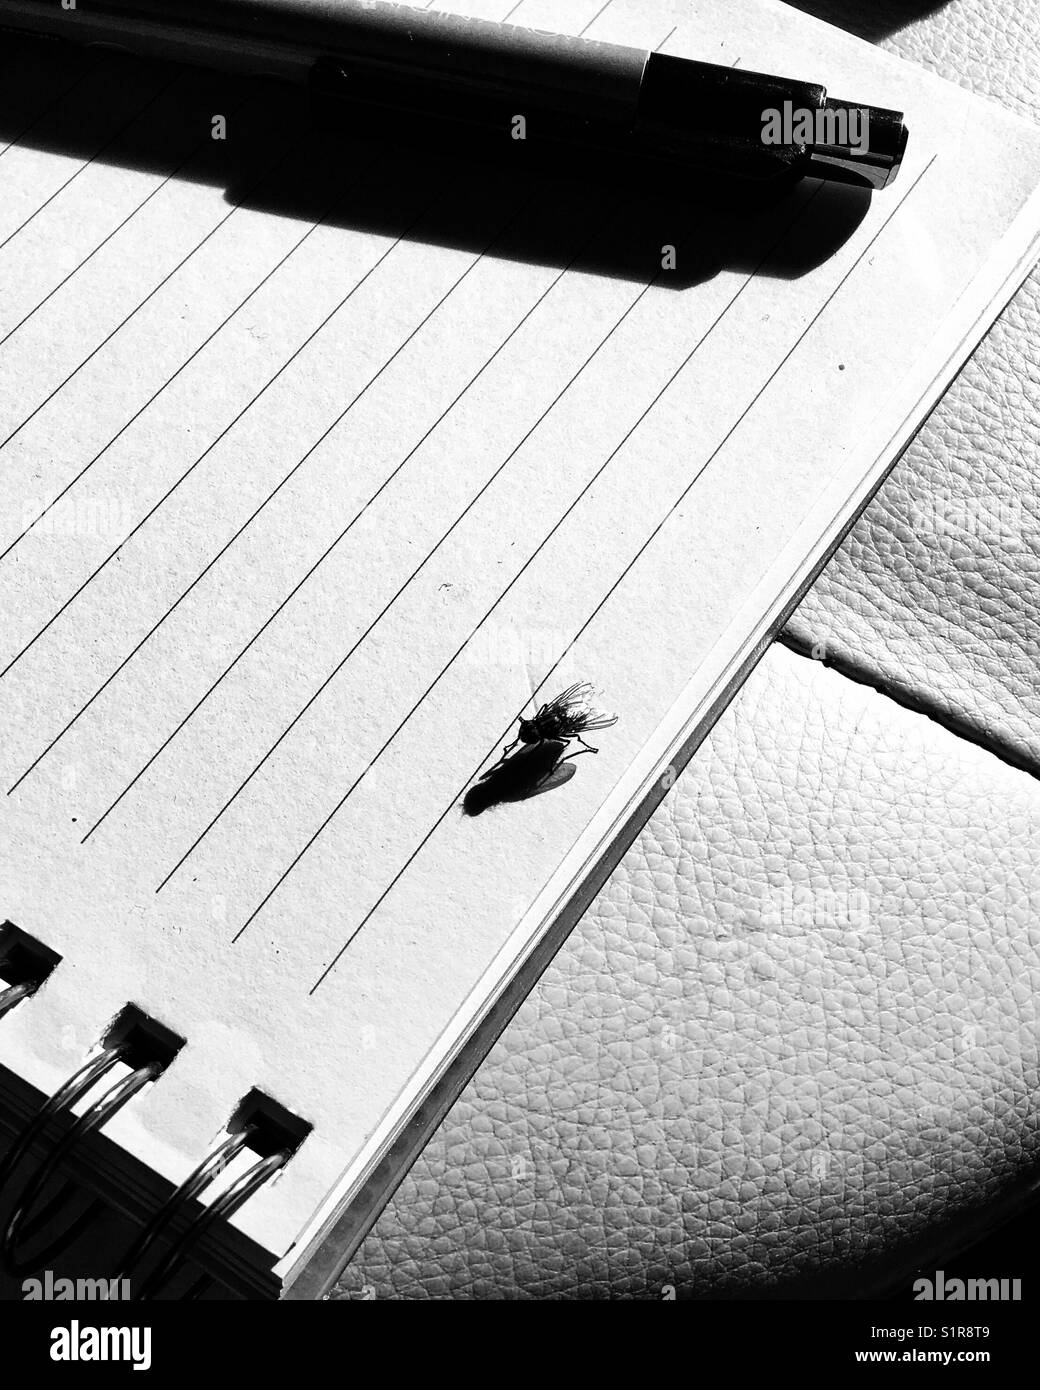 Fly And Pen On Lined Page Of A Note Pad In Black And White Stock Photo Alamy